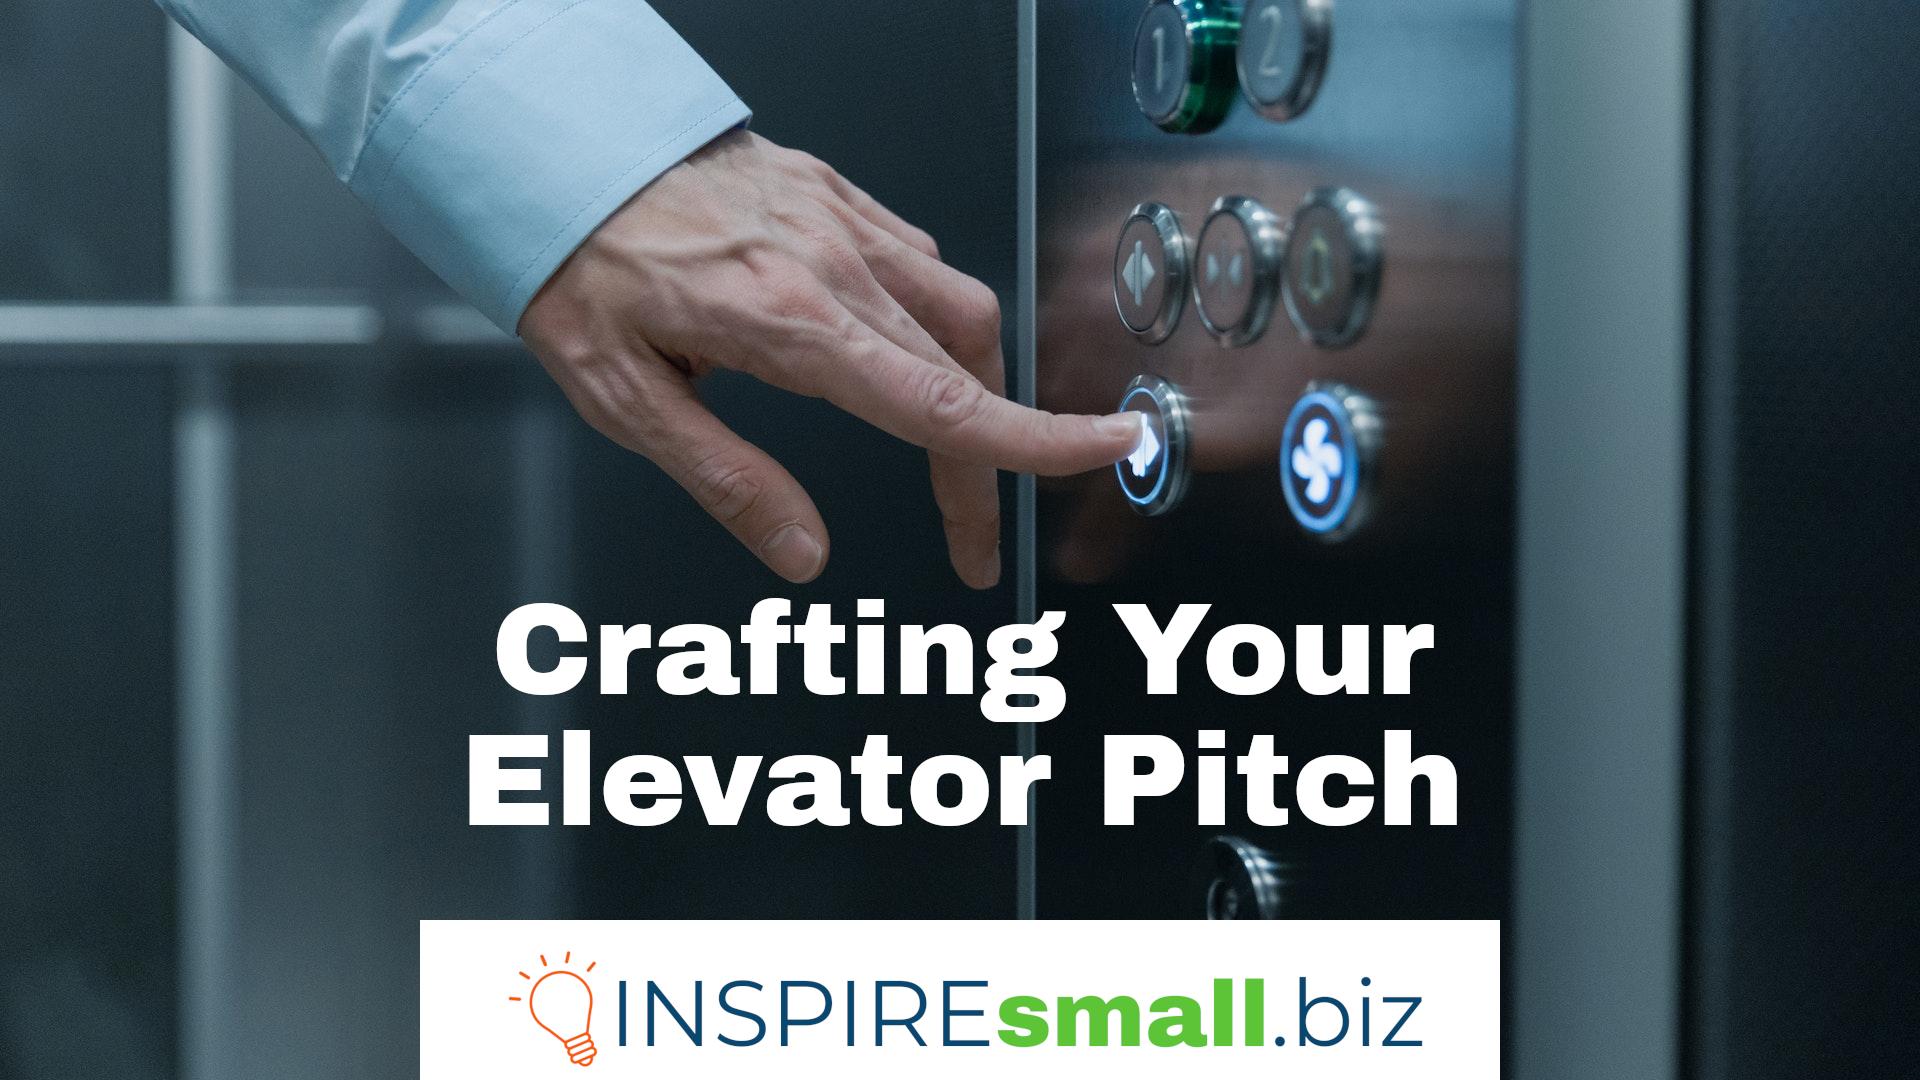 Crafting Your Elevator Pitch Workshop from INSPIREsmall.biz